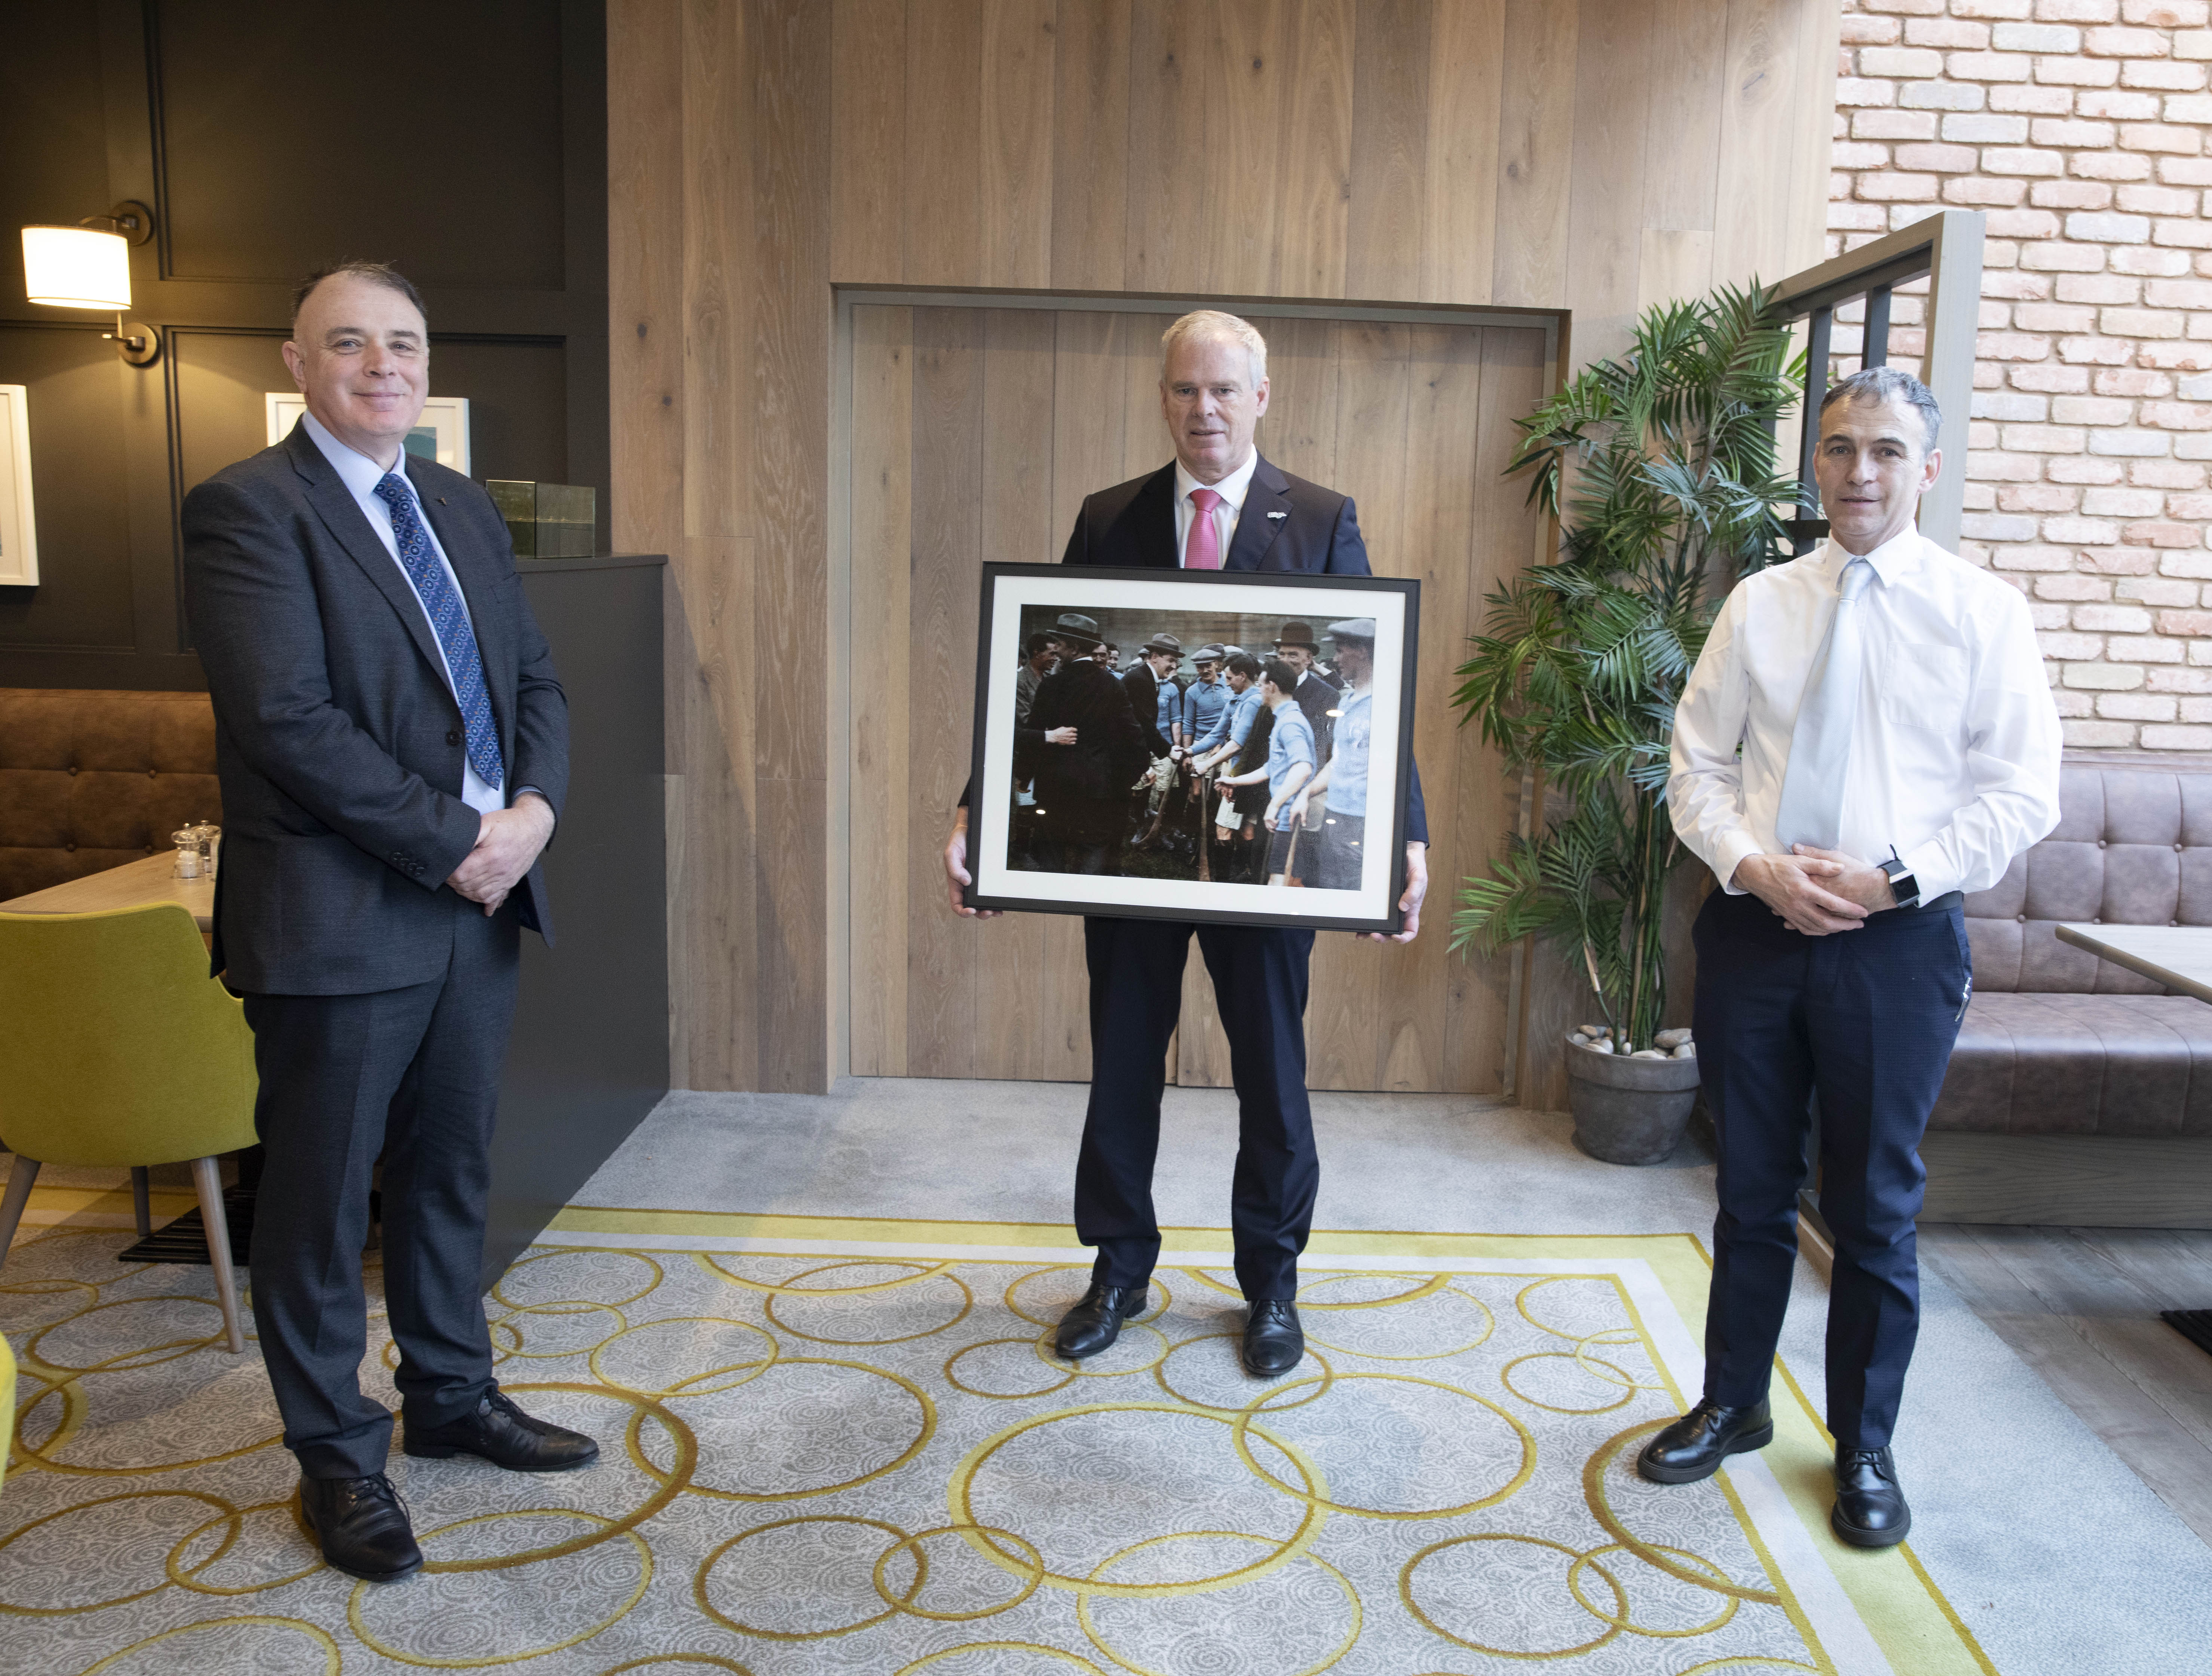 Cathaoirleach pays tribute to outgoing Chief Executive 